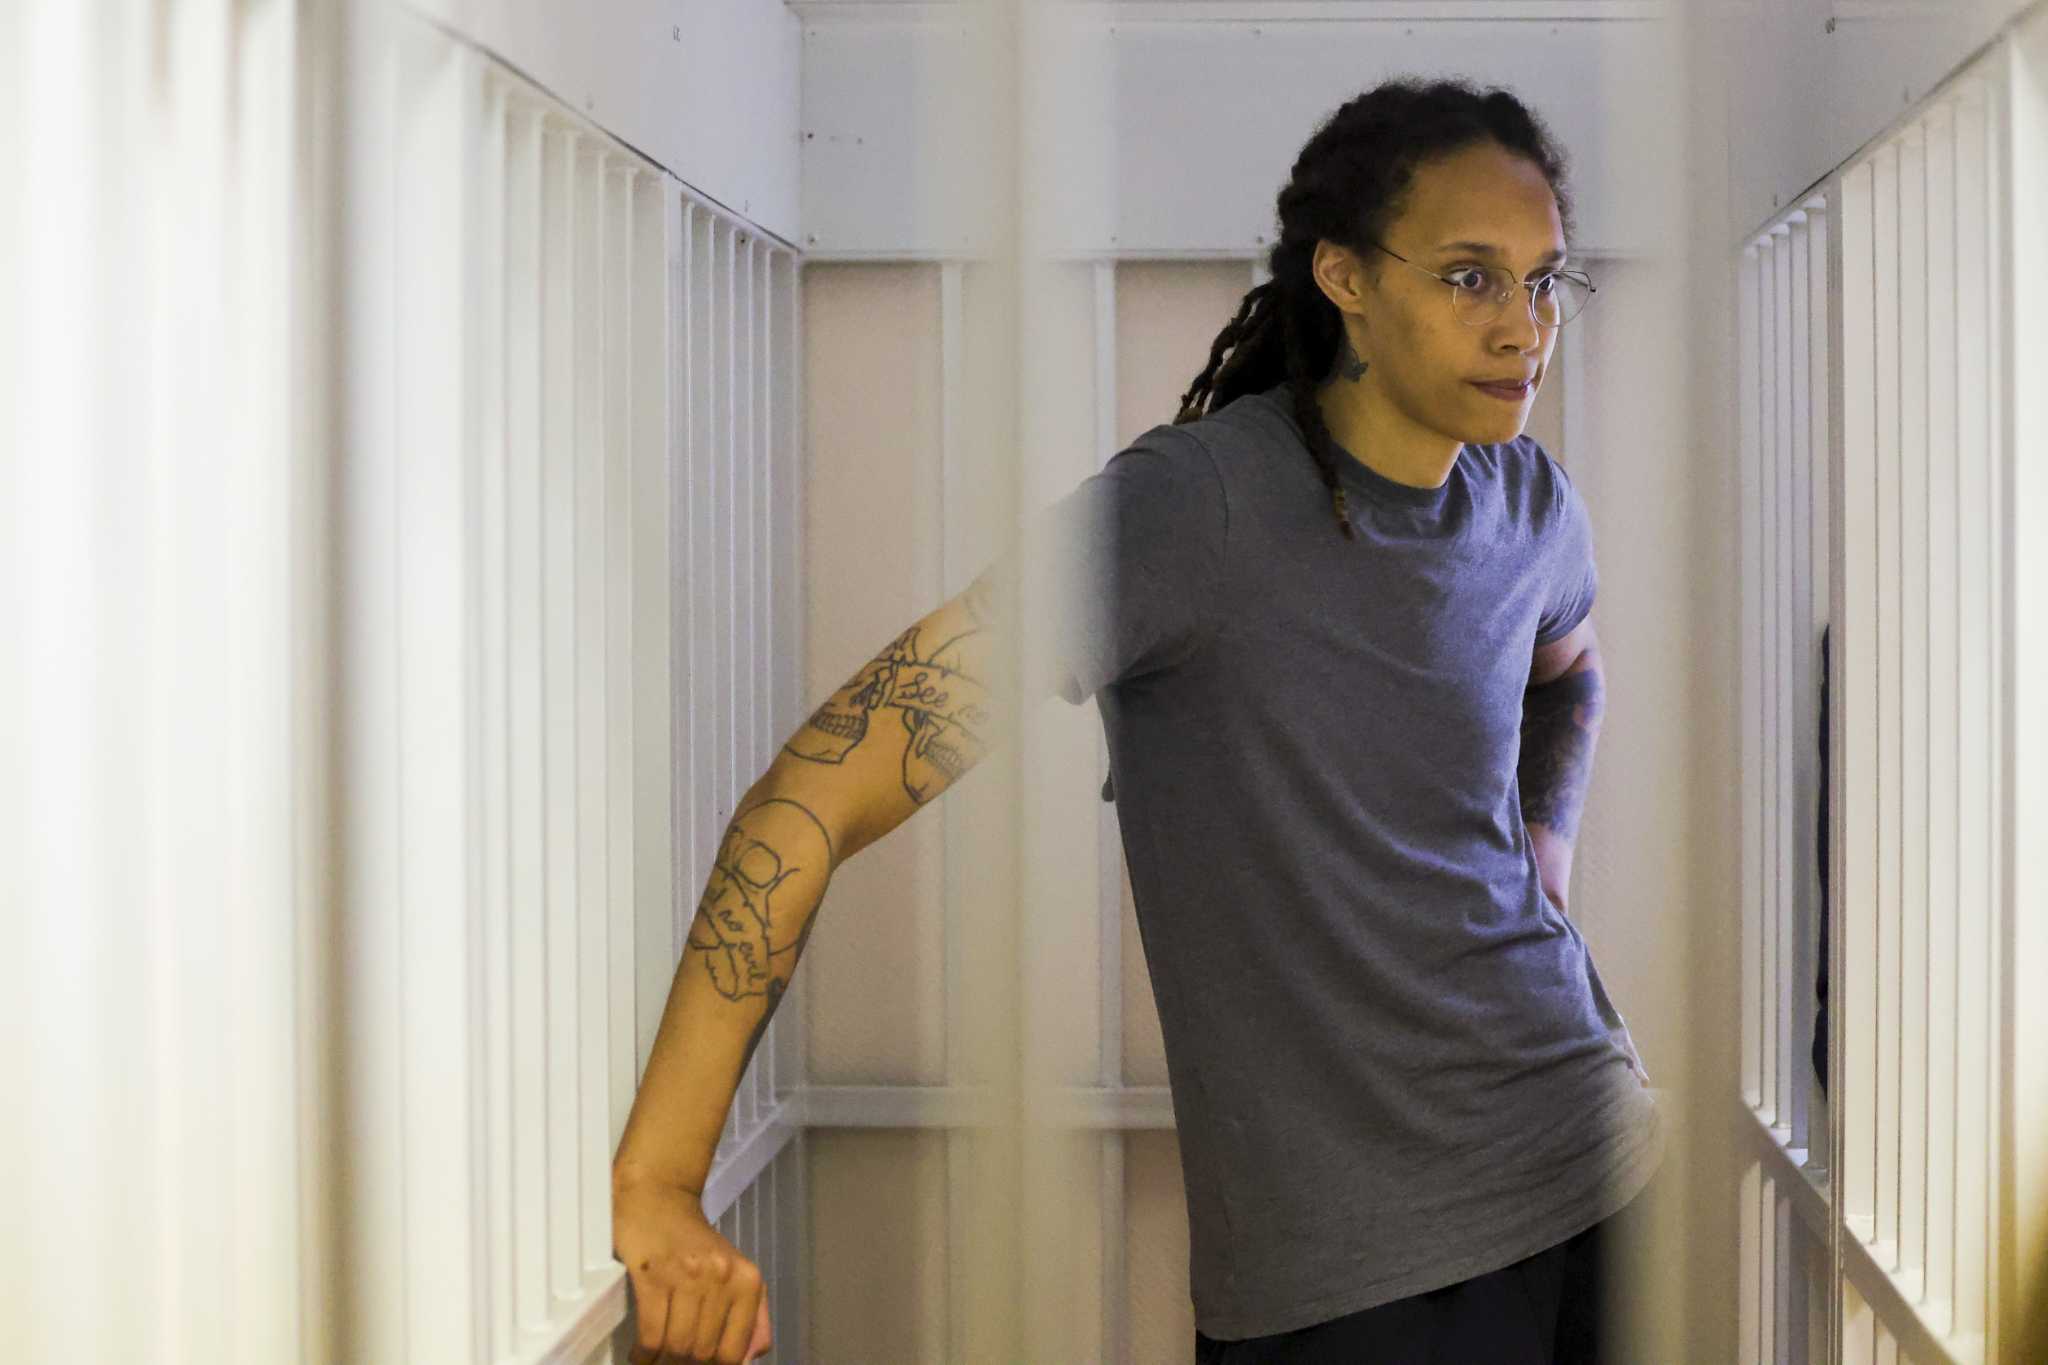 Check out the tattoos do they match the ones on Brittney Griner  TikTok